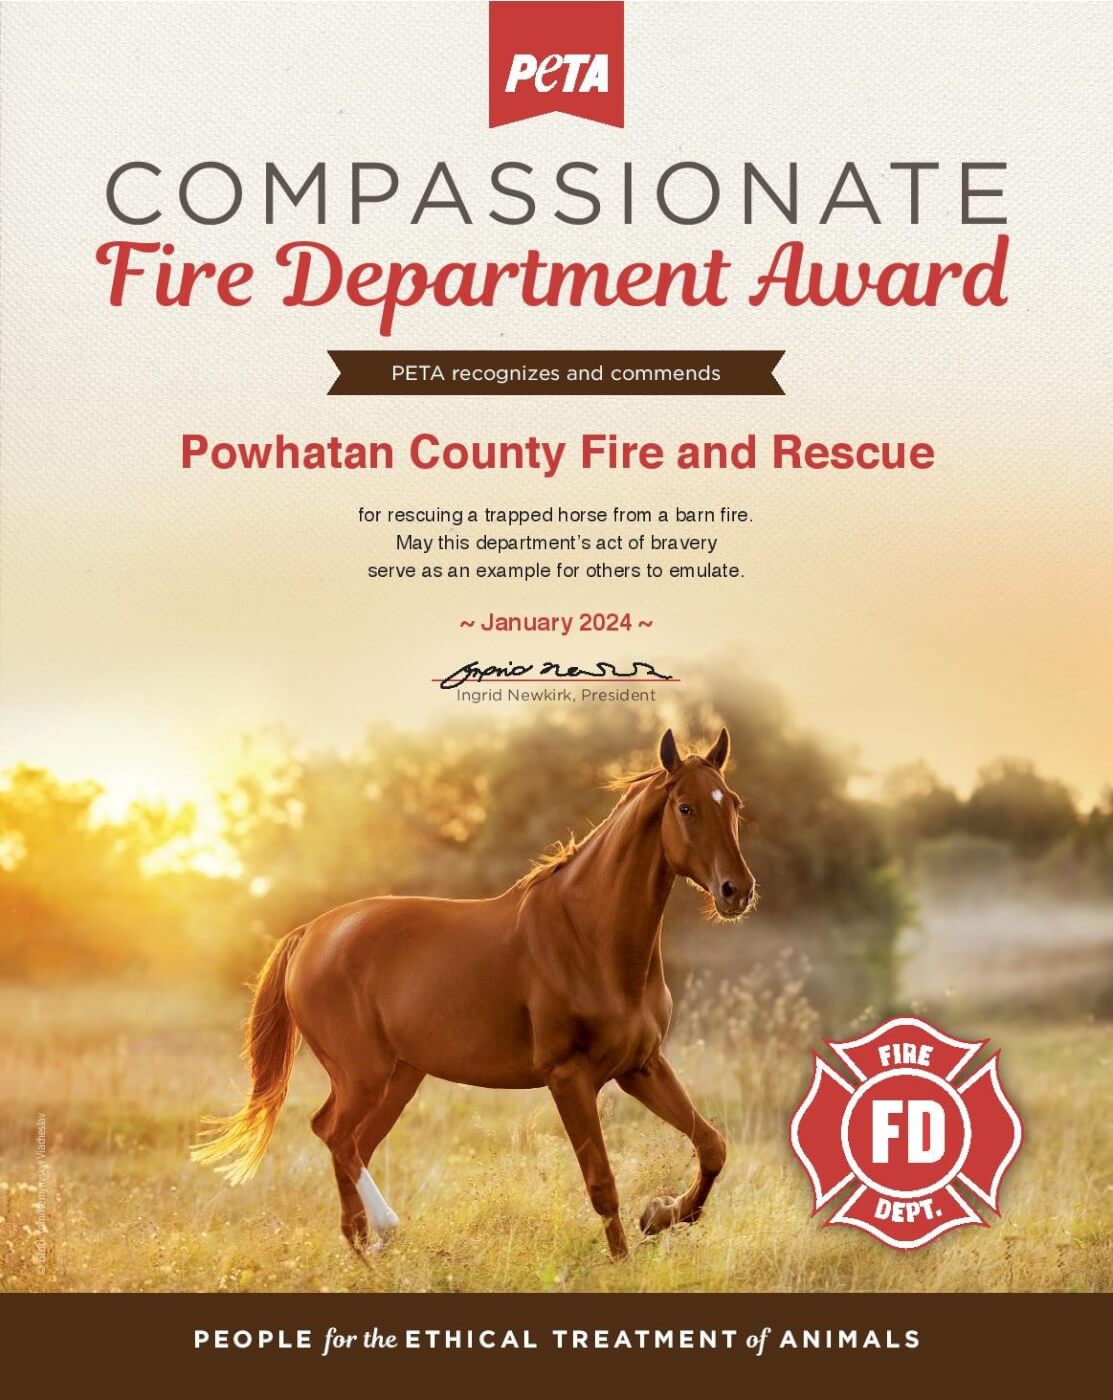 Compassionate Fire Department Award Powhatan County 1.24 PO Powhatan County Fire Department, Good Samaritans Nab PETA Awards for Saving Horses From Fire